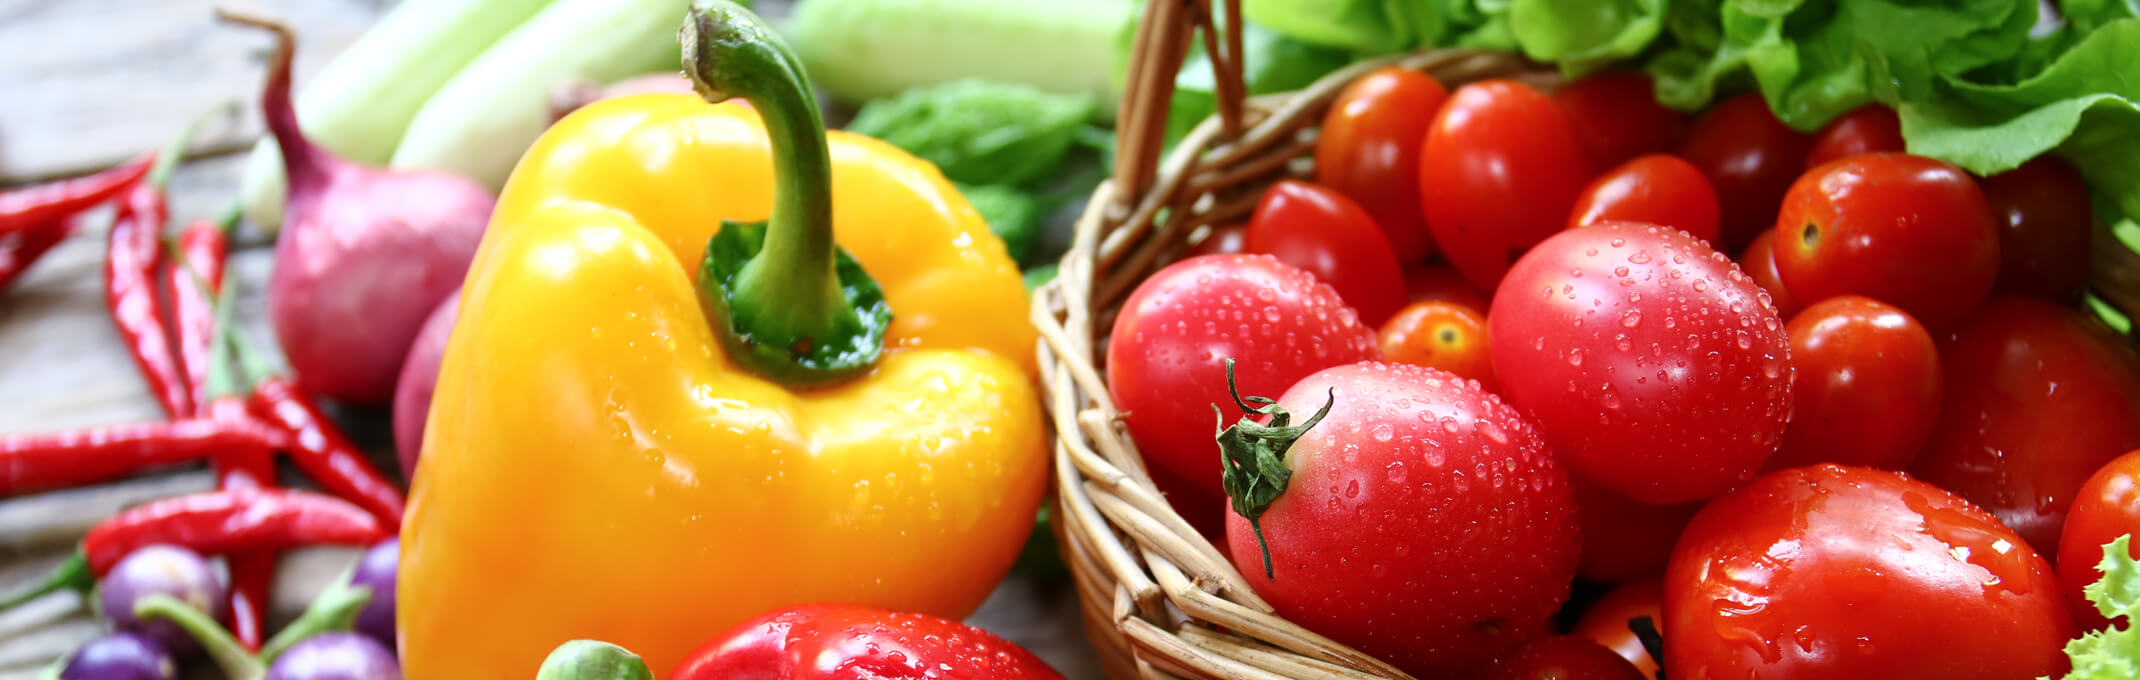 An assortment of hot and bell pepper with shallots in the background next to a basket of cherry and grape tomatoes with lettuce in the background